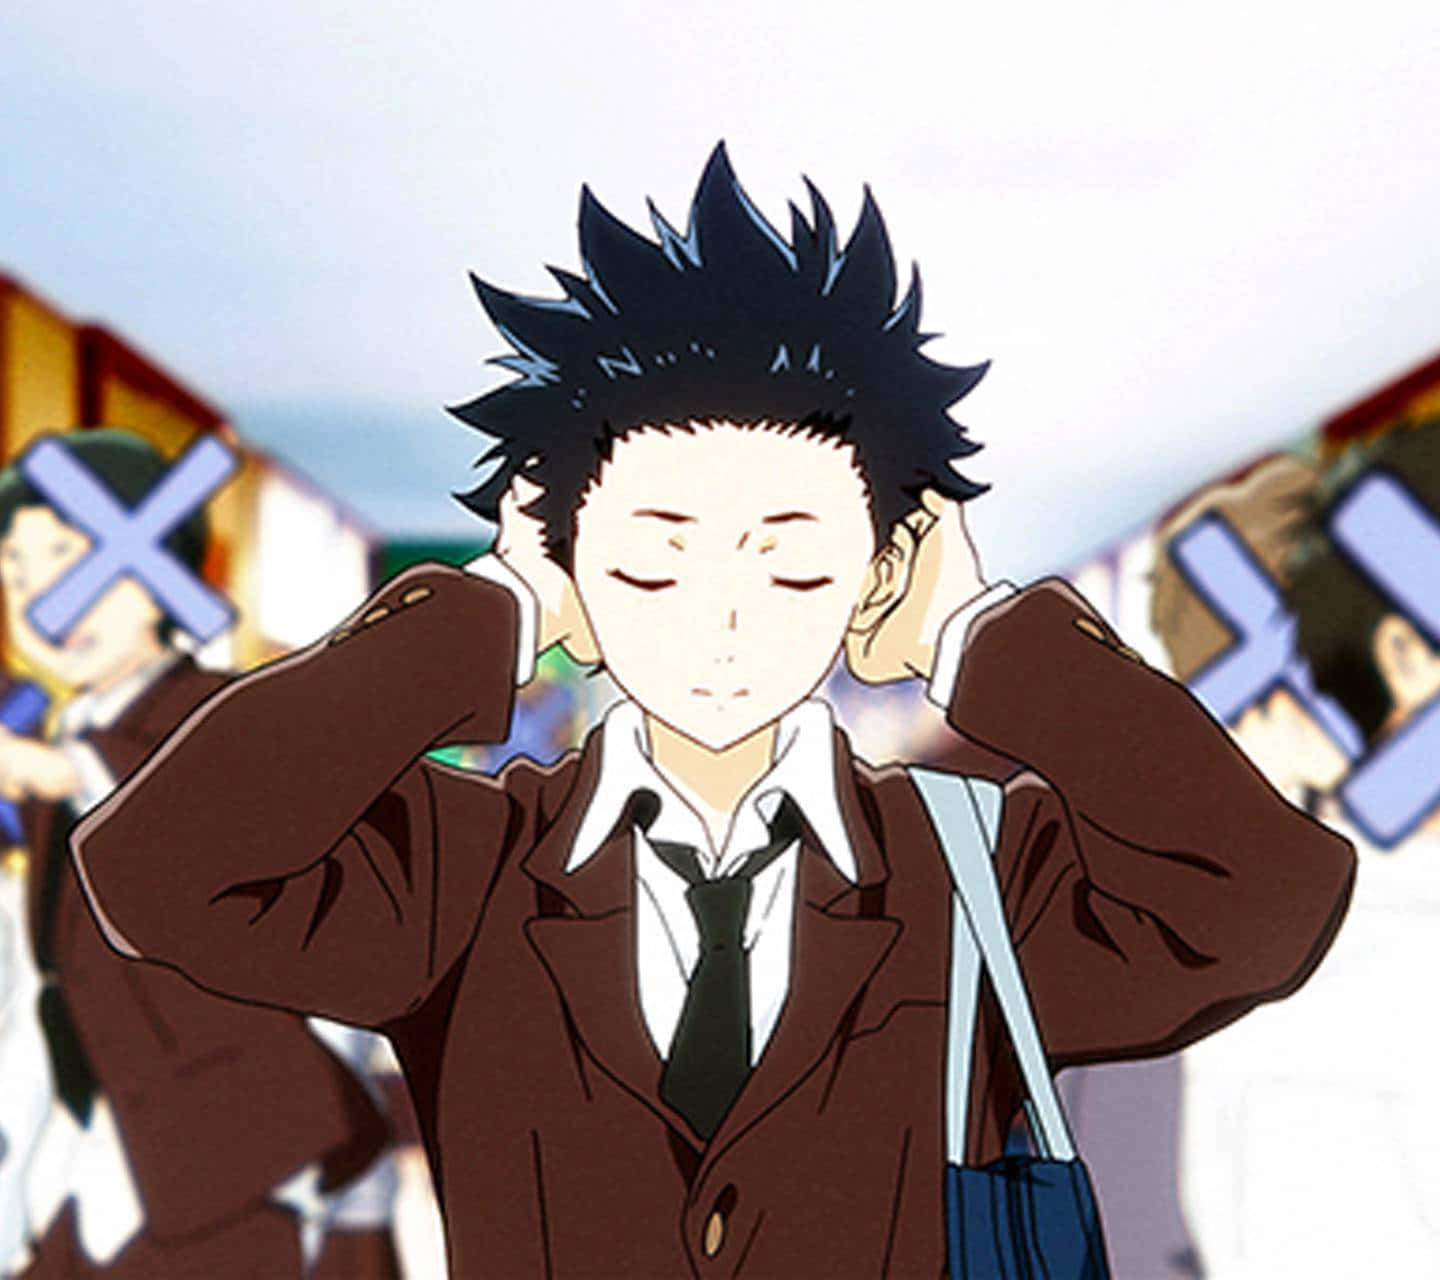 The Powerful Themes Explored in “A Silent Voice”: Film Analysis | by Nick  Toney | Cinemania | Medium